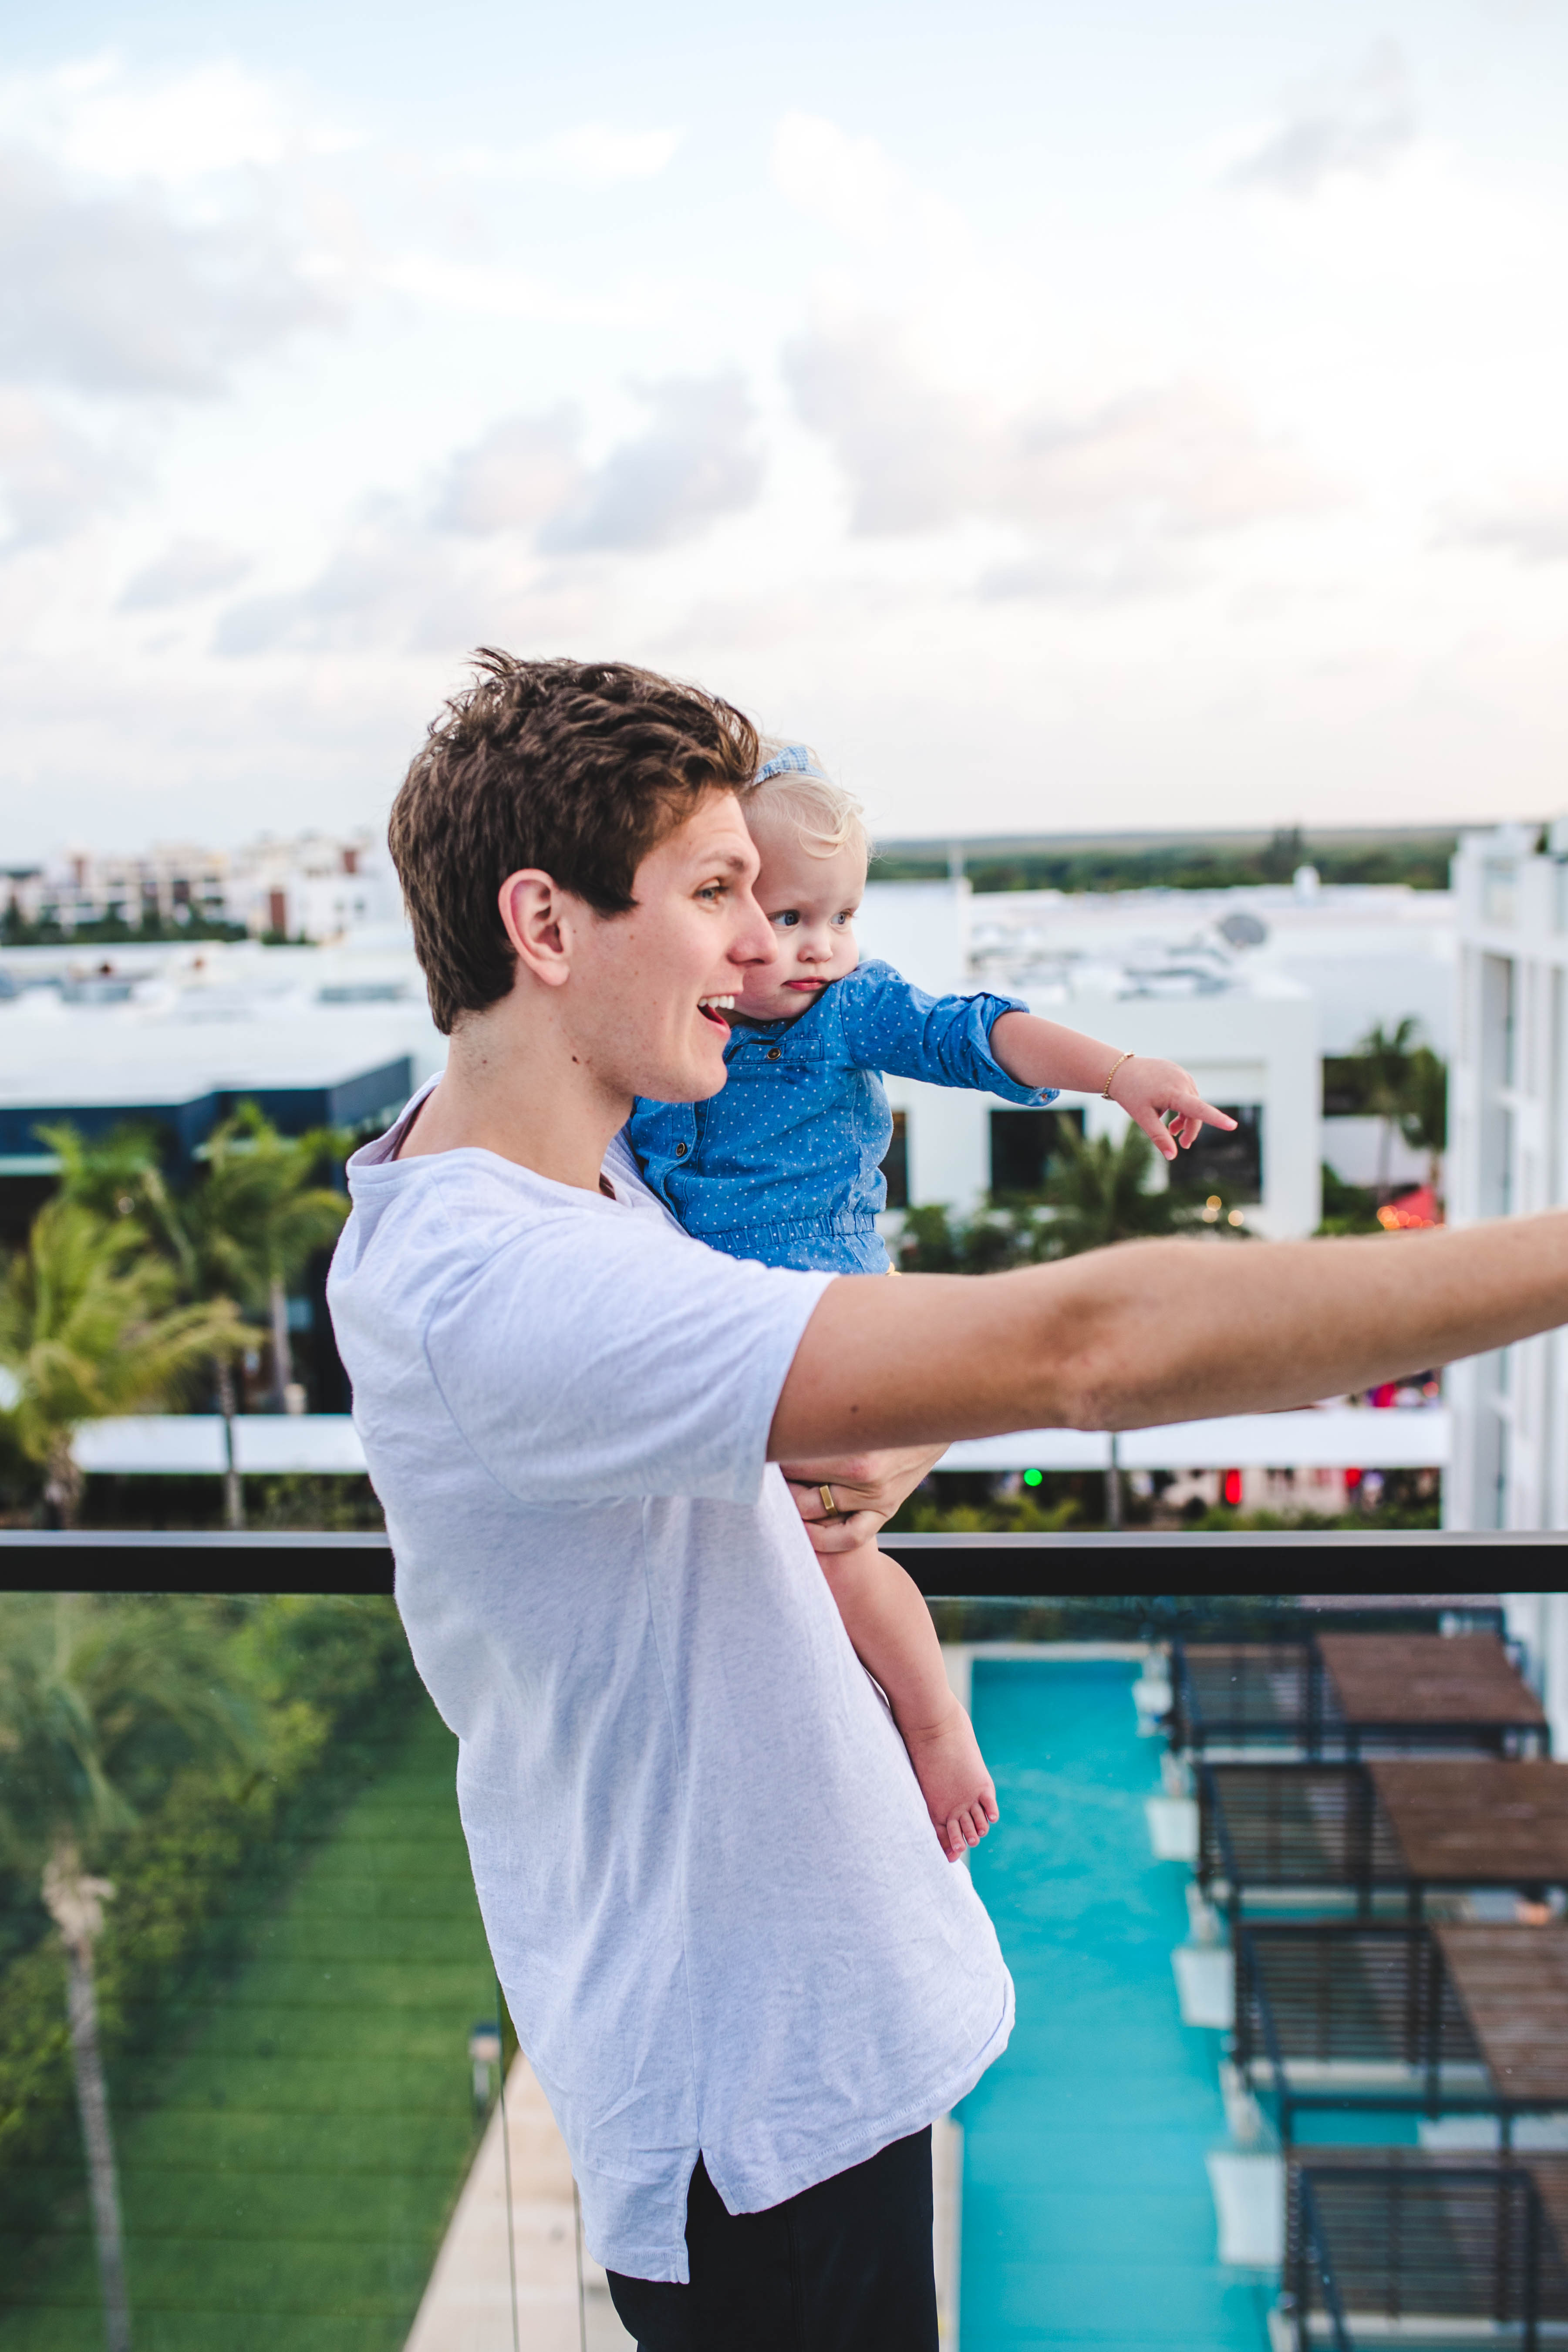 Cancun With Kids | Brad & Hailey Devine | Traveling Family | Traveling to Mexico with Kids | Family Friendly Vacations